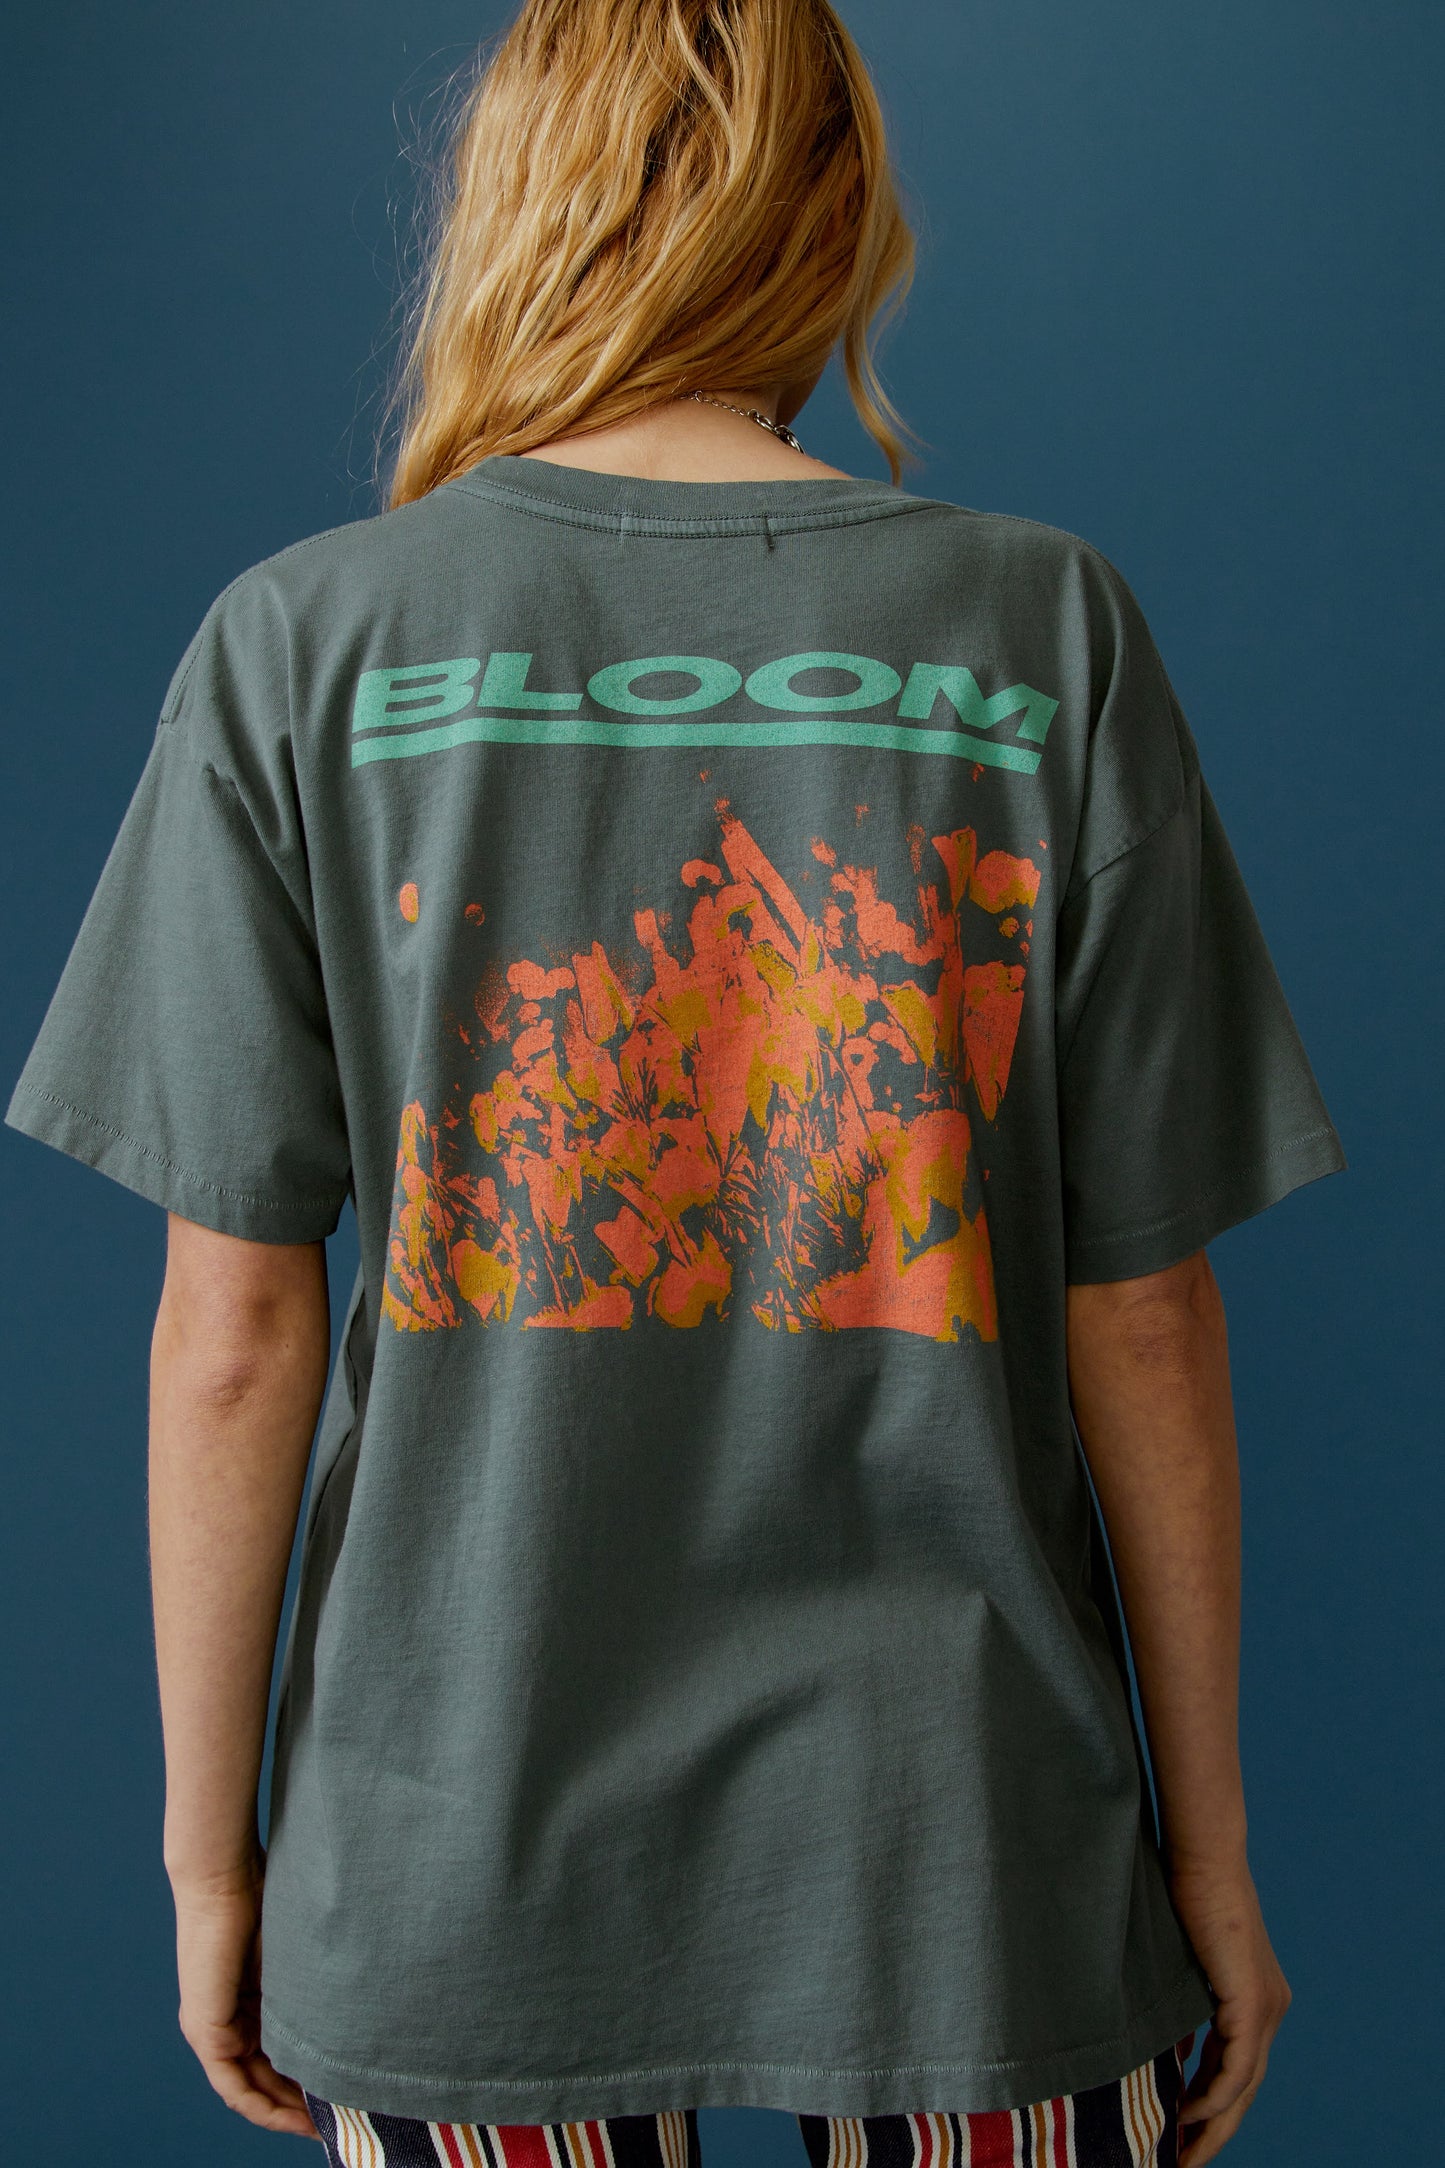 A blonde-haired model featuring a grey tee stamped with 'Daydreamer Los Angeles', a graphic of leaves and butterflies in orange, the same at the back but stamped with 'Bloom'.